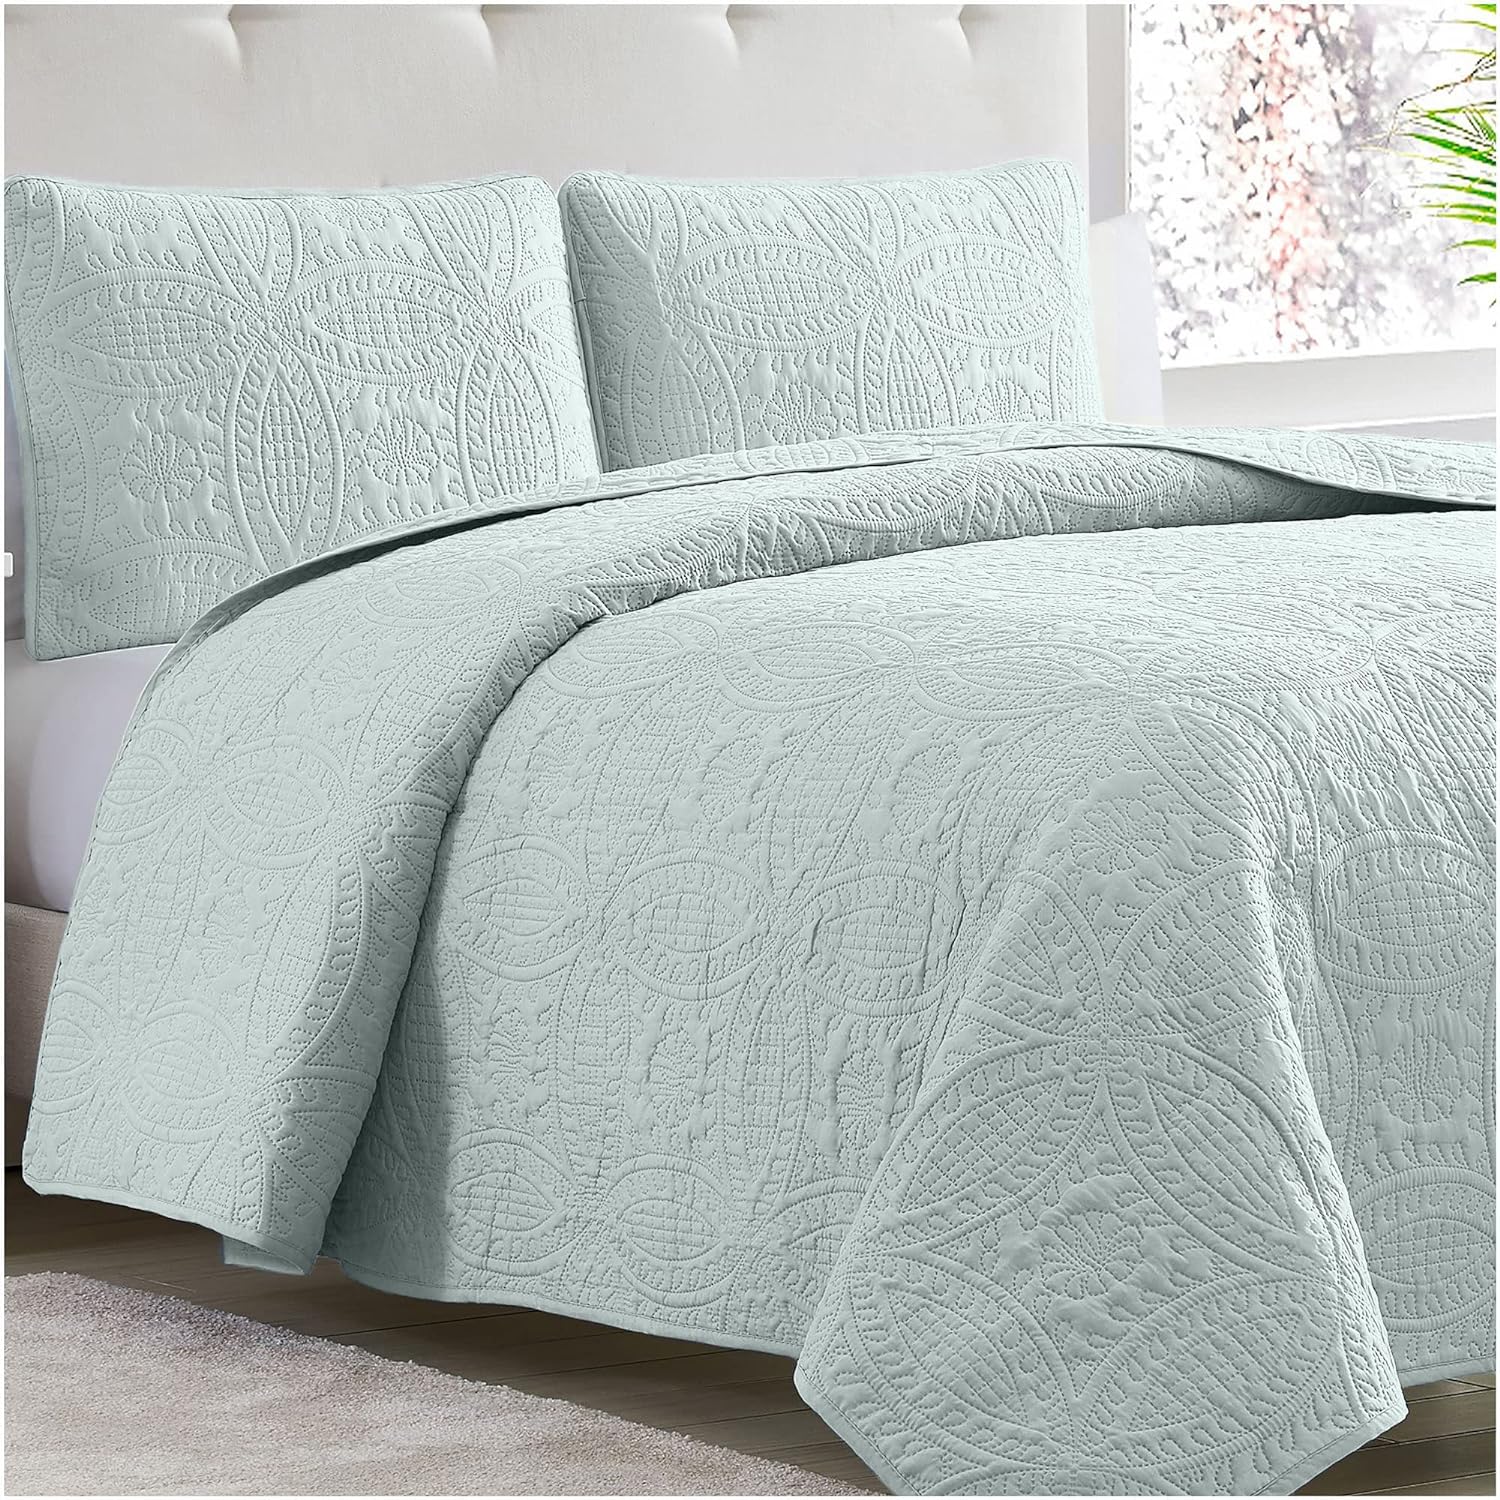 Mellanni Bedspread Coverlet Set - White Bedding Cover with Shams - Ultrasonic Quilting Technology - 3 Piece Oversized White Quilt Queen Set - Bedspreads & Coverlets (Full/Queen, White) 